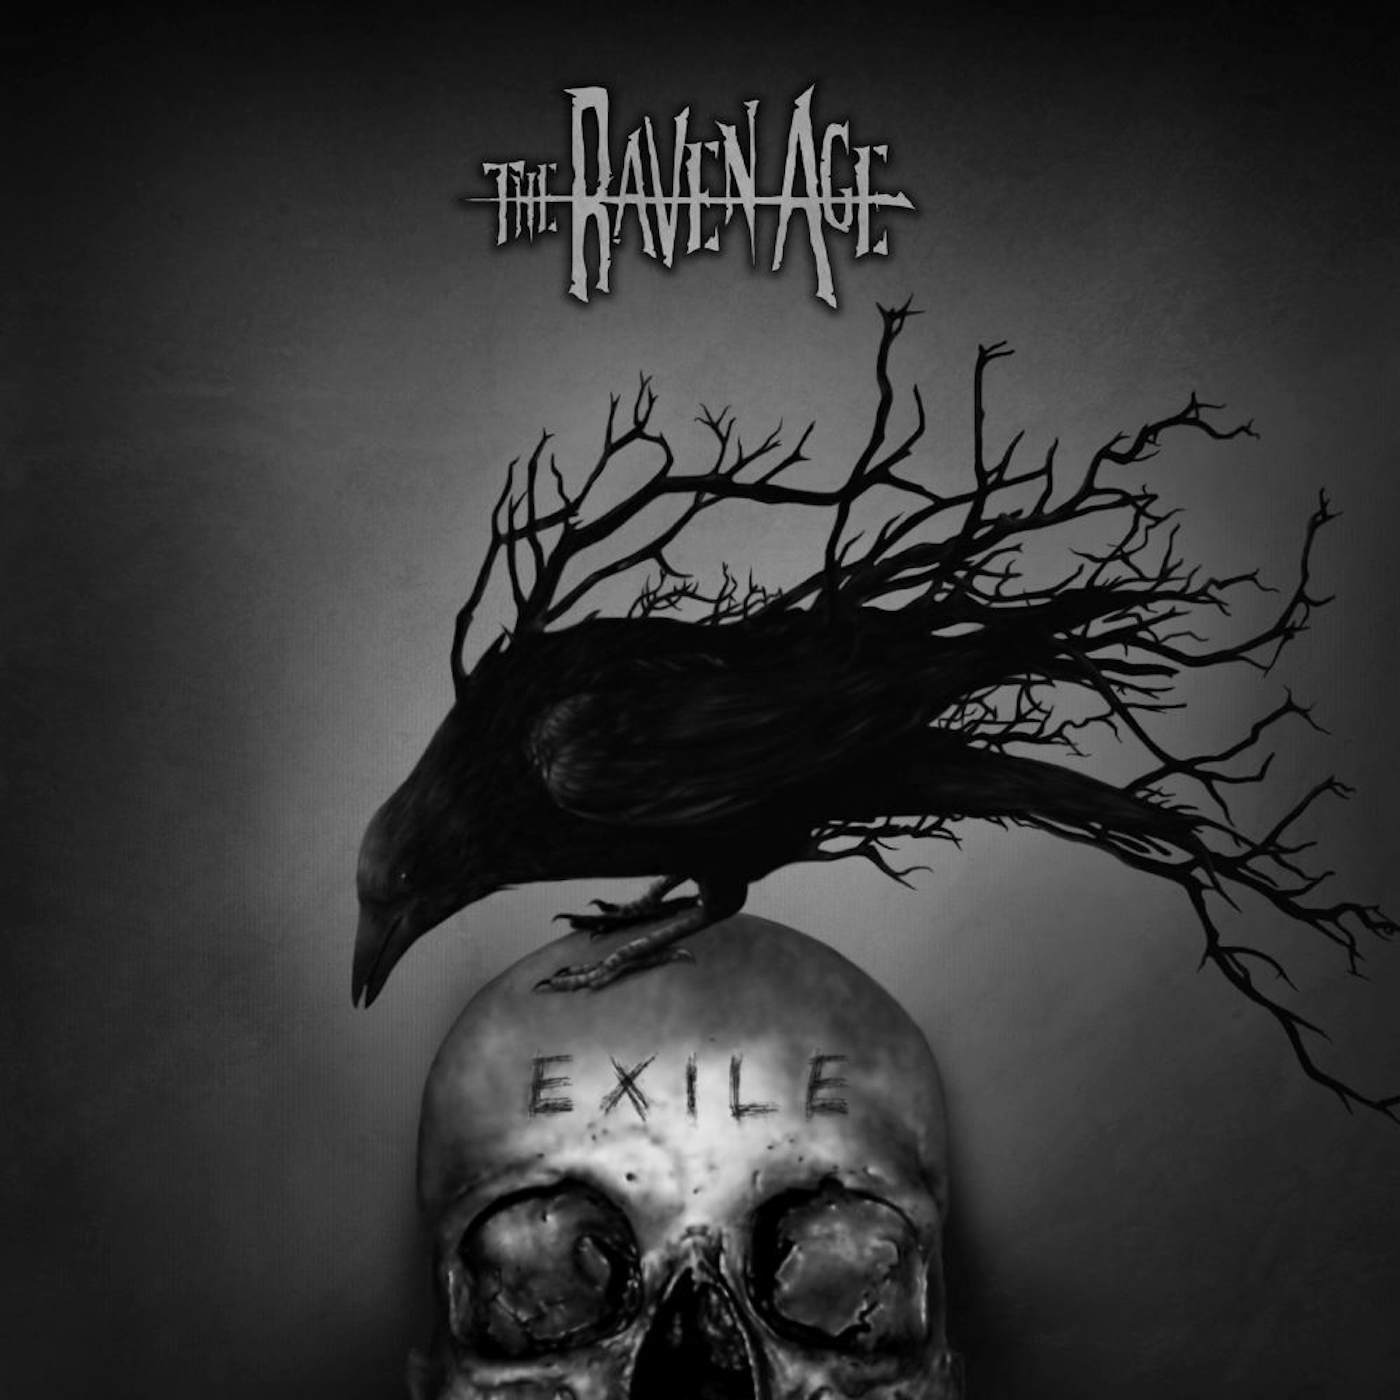 The Raven Age Exile CD